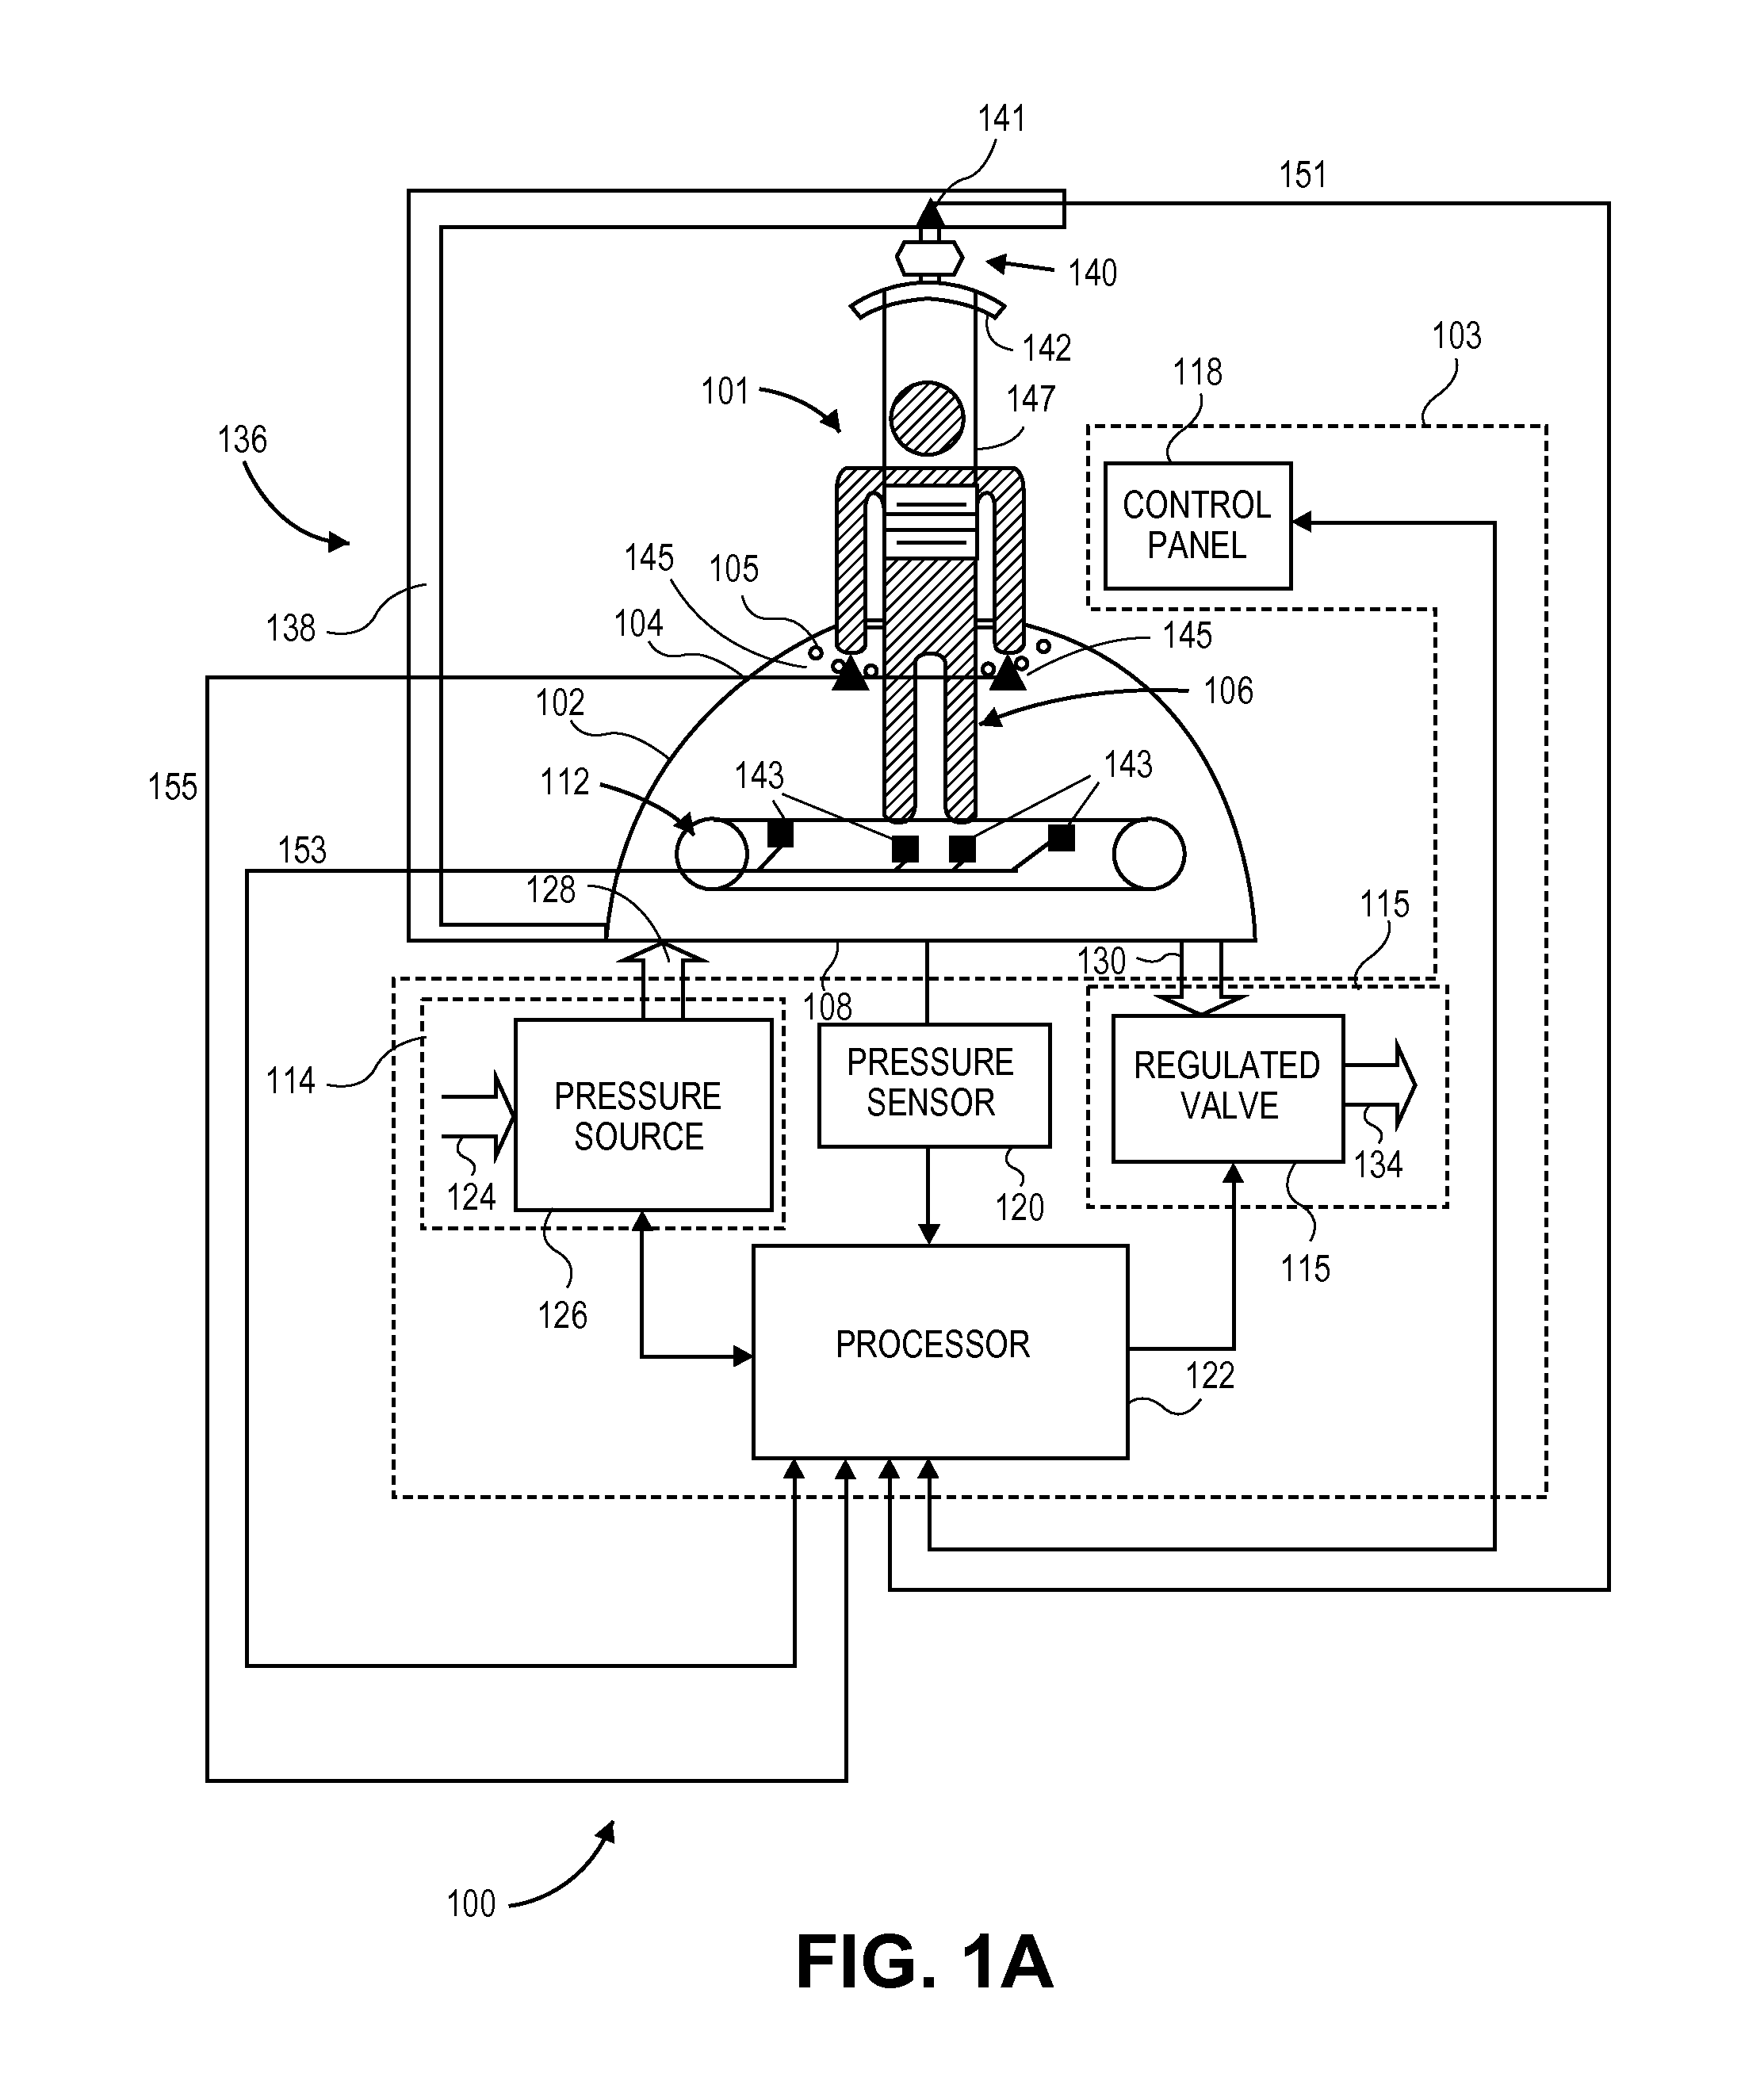 Differential air pressure systems and methods of using and calibrating such systems for mobility impaired users